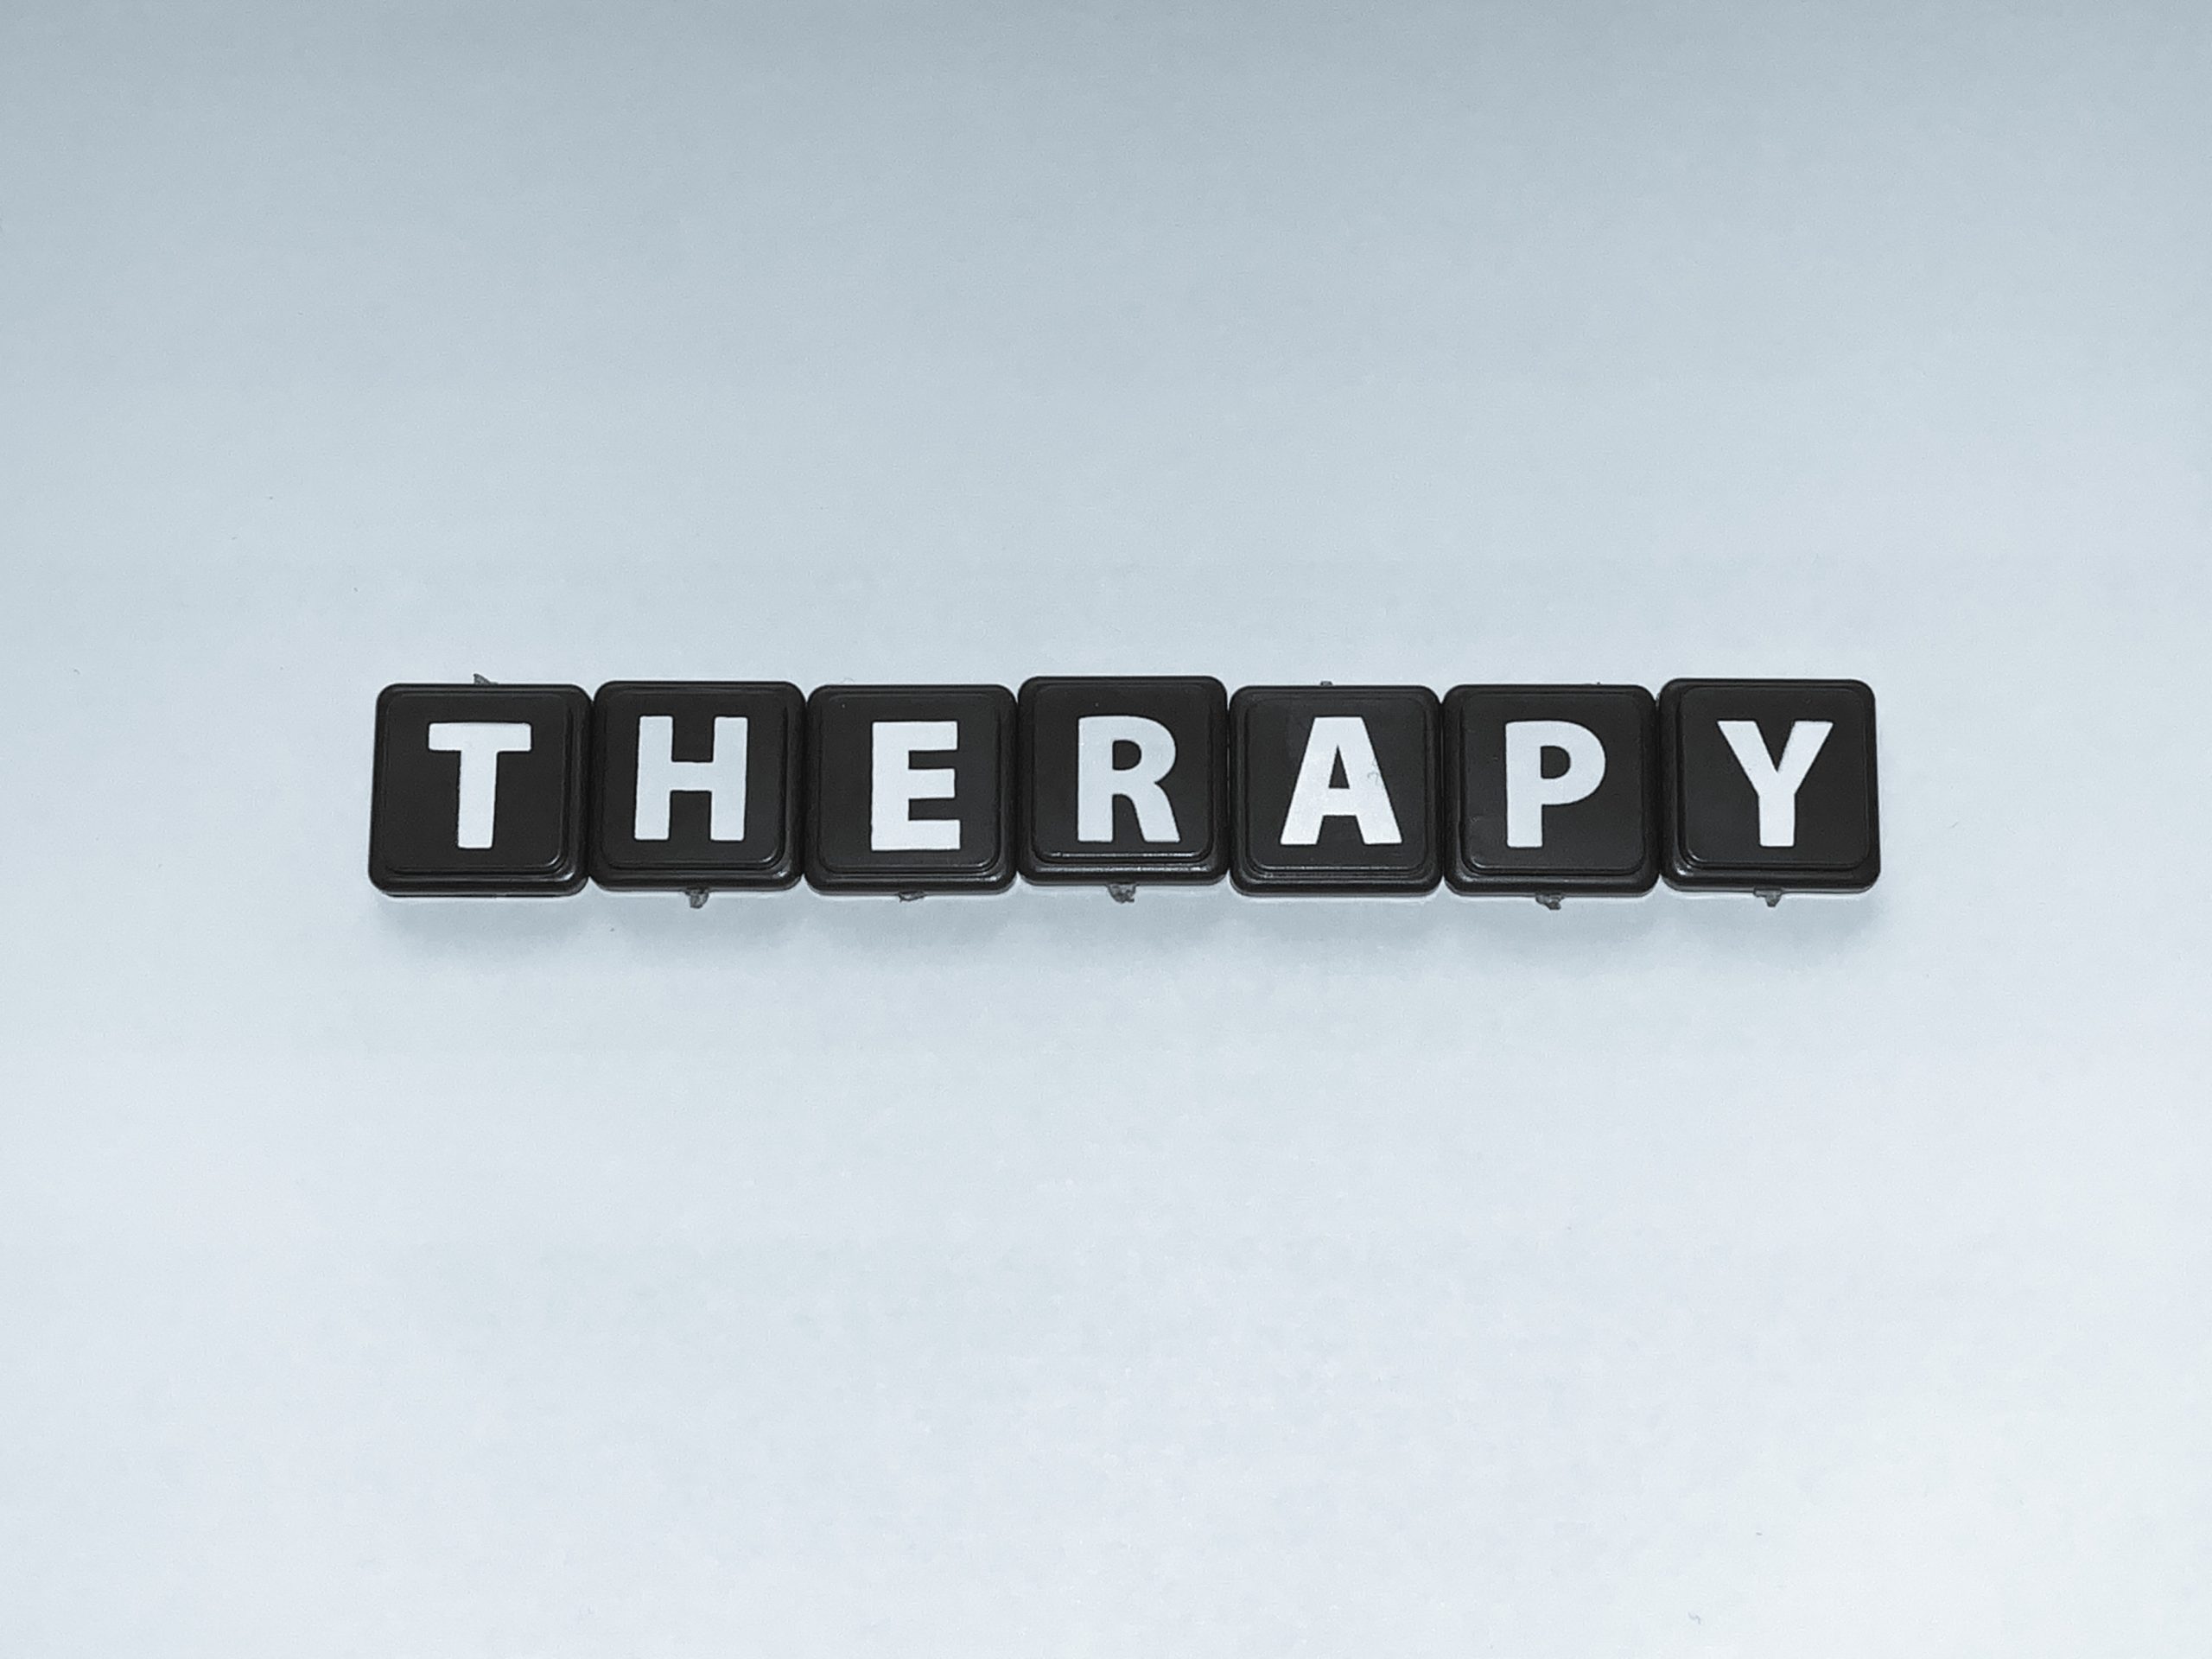 do therapists have therapists, therapy for therapists, what percentage of therapists have therapists, do therapists have their own issues, do therapists get depressed, do therapists have good mental health